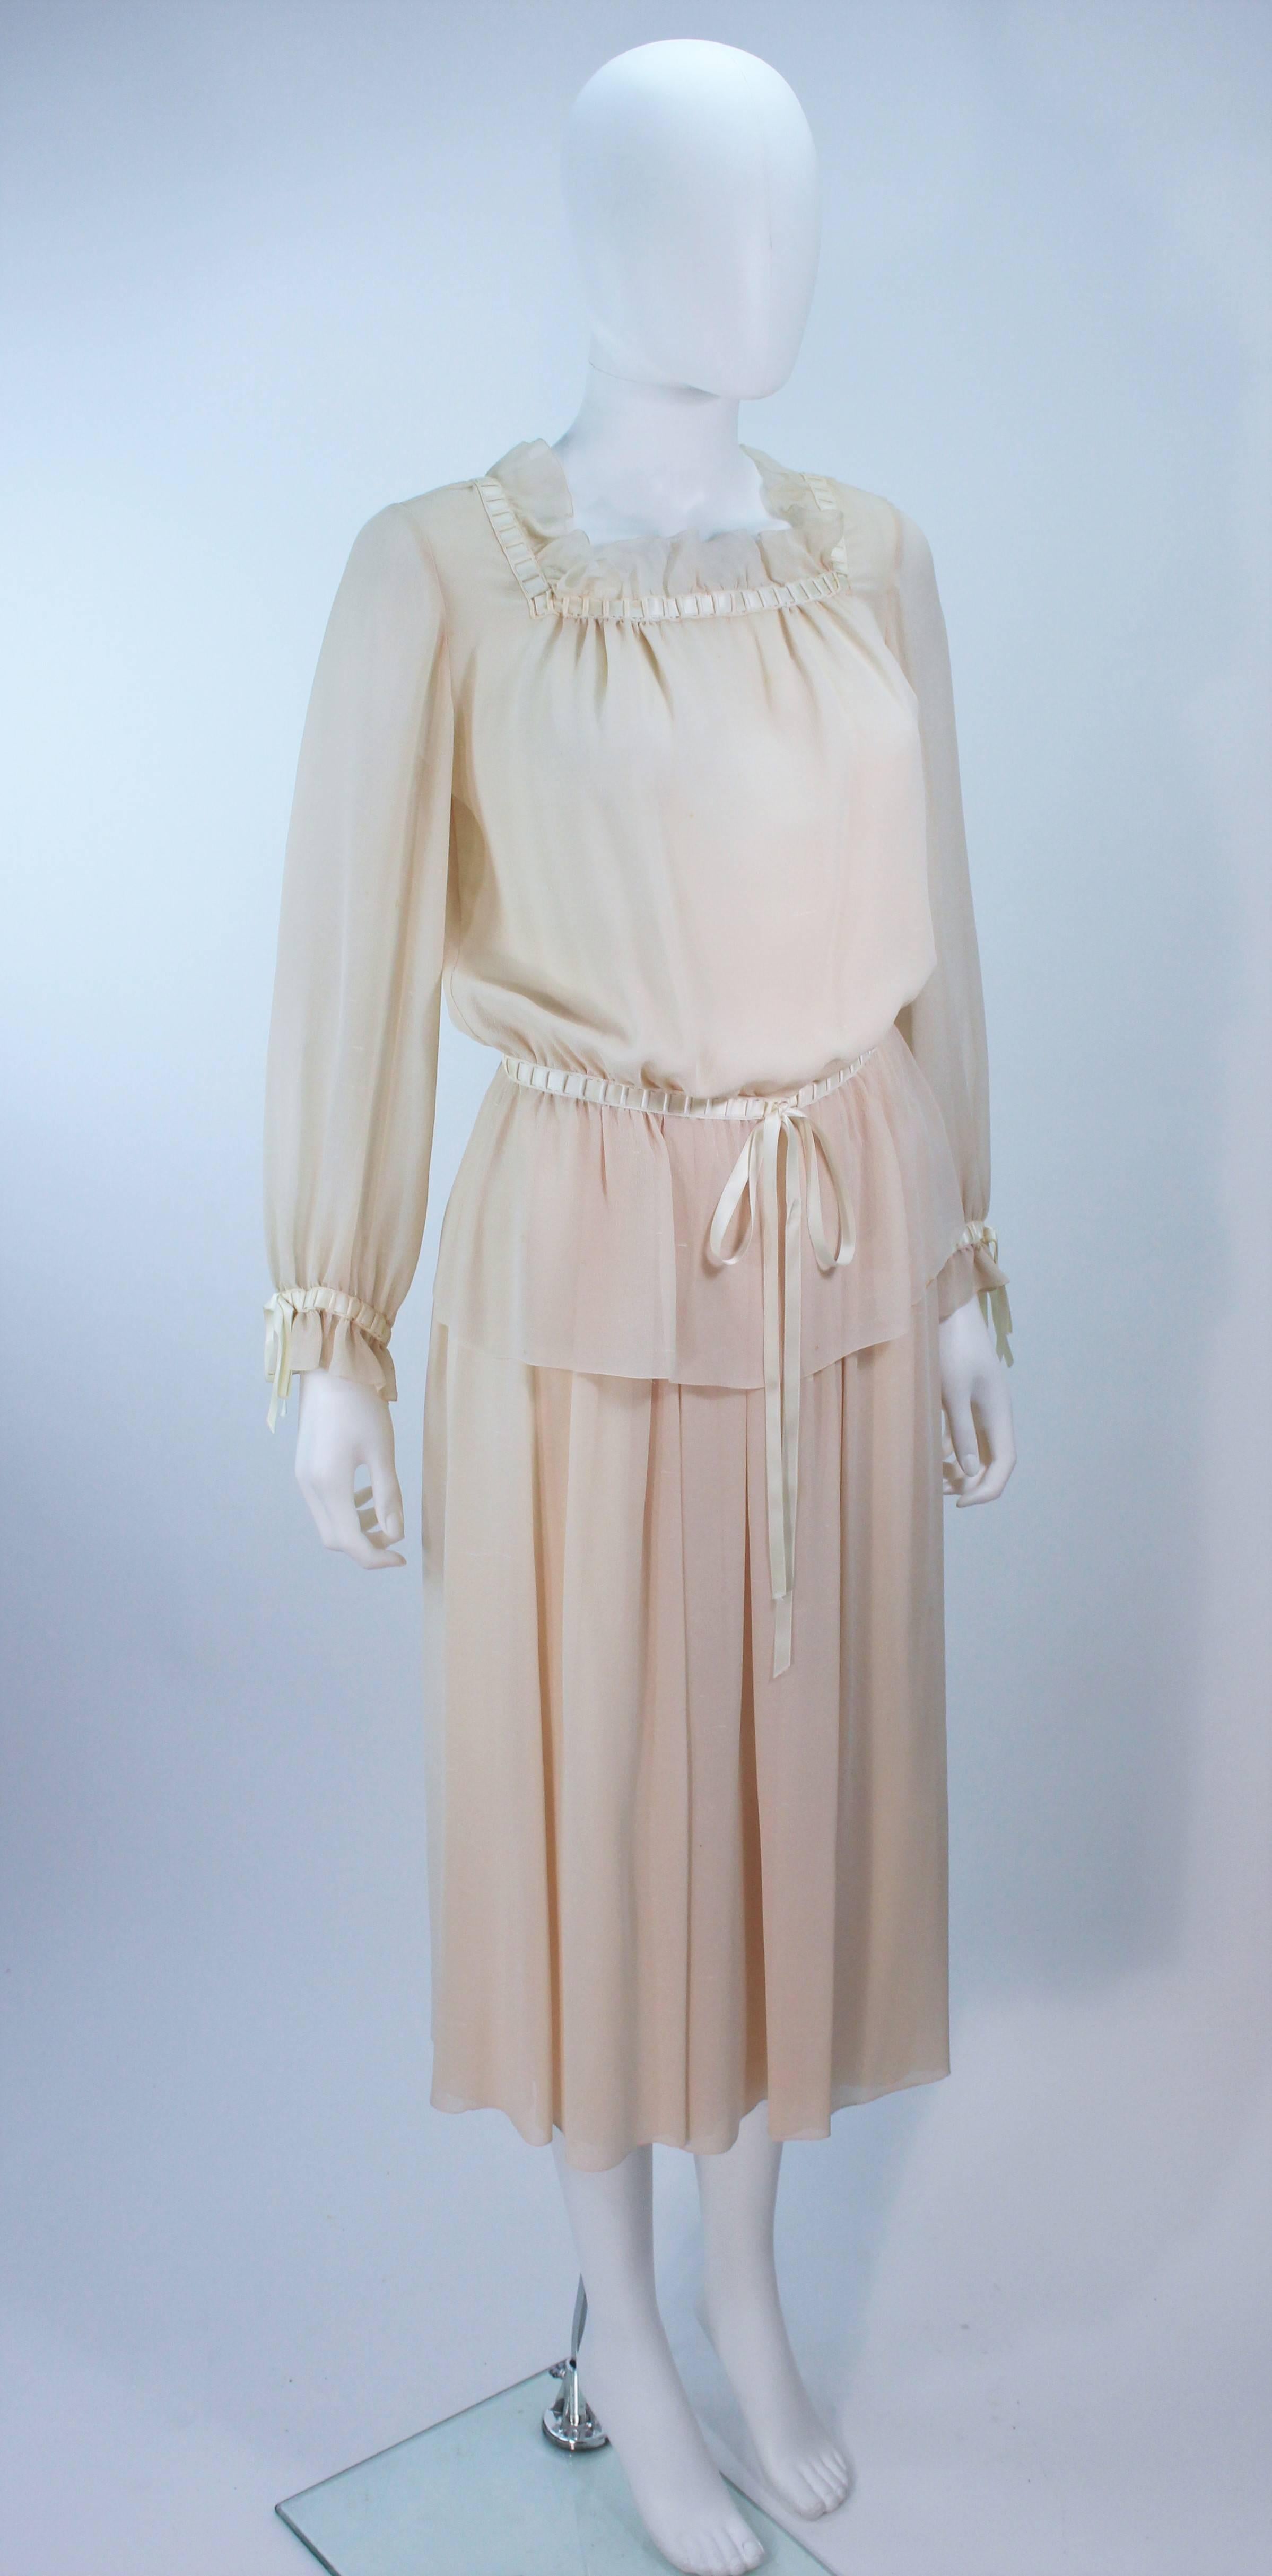 Gray CHRISTIAN DIOR COUTURE Betsy Bloomingdale Silk Chiffon Skirt & Blouse Set Size 2 For Sale